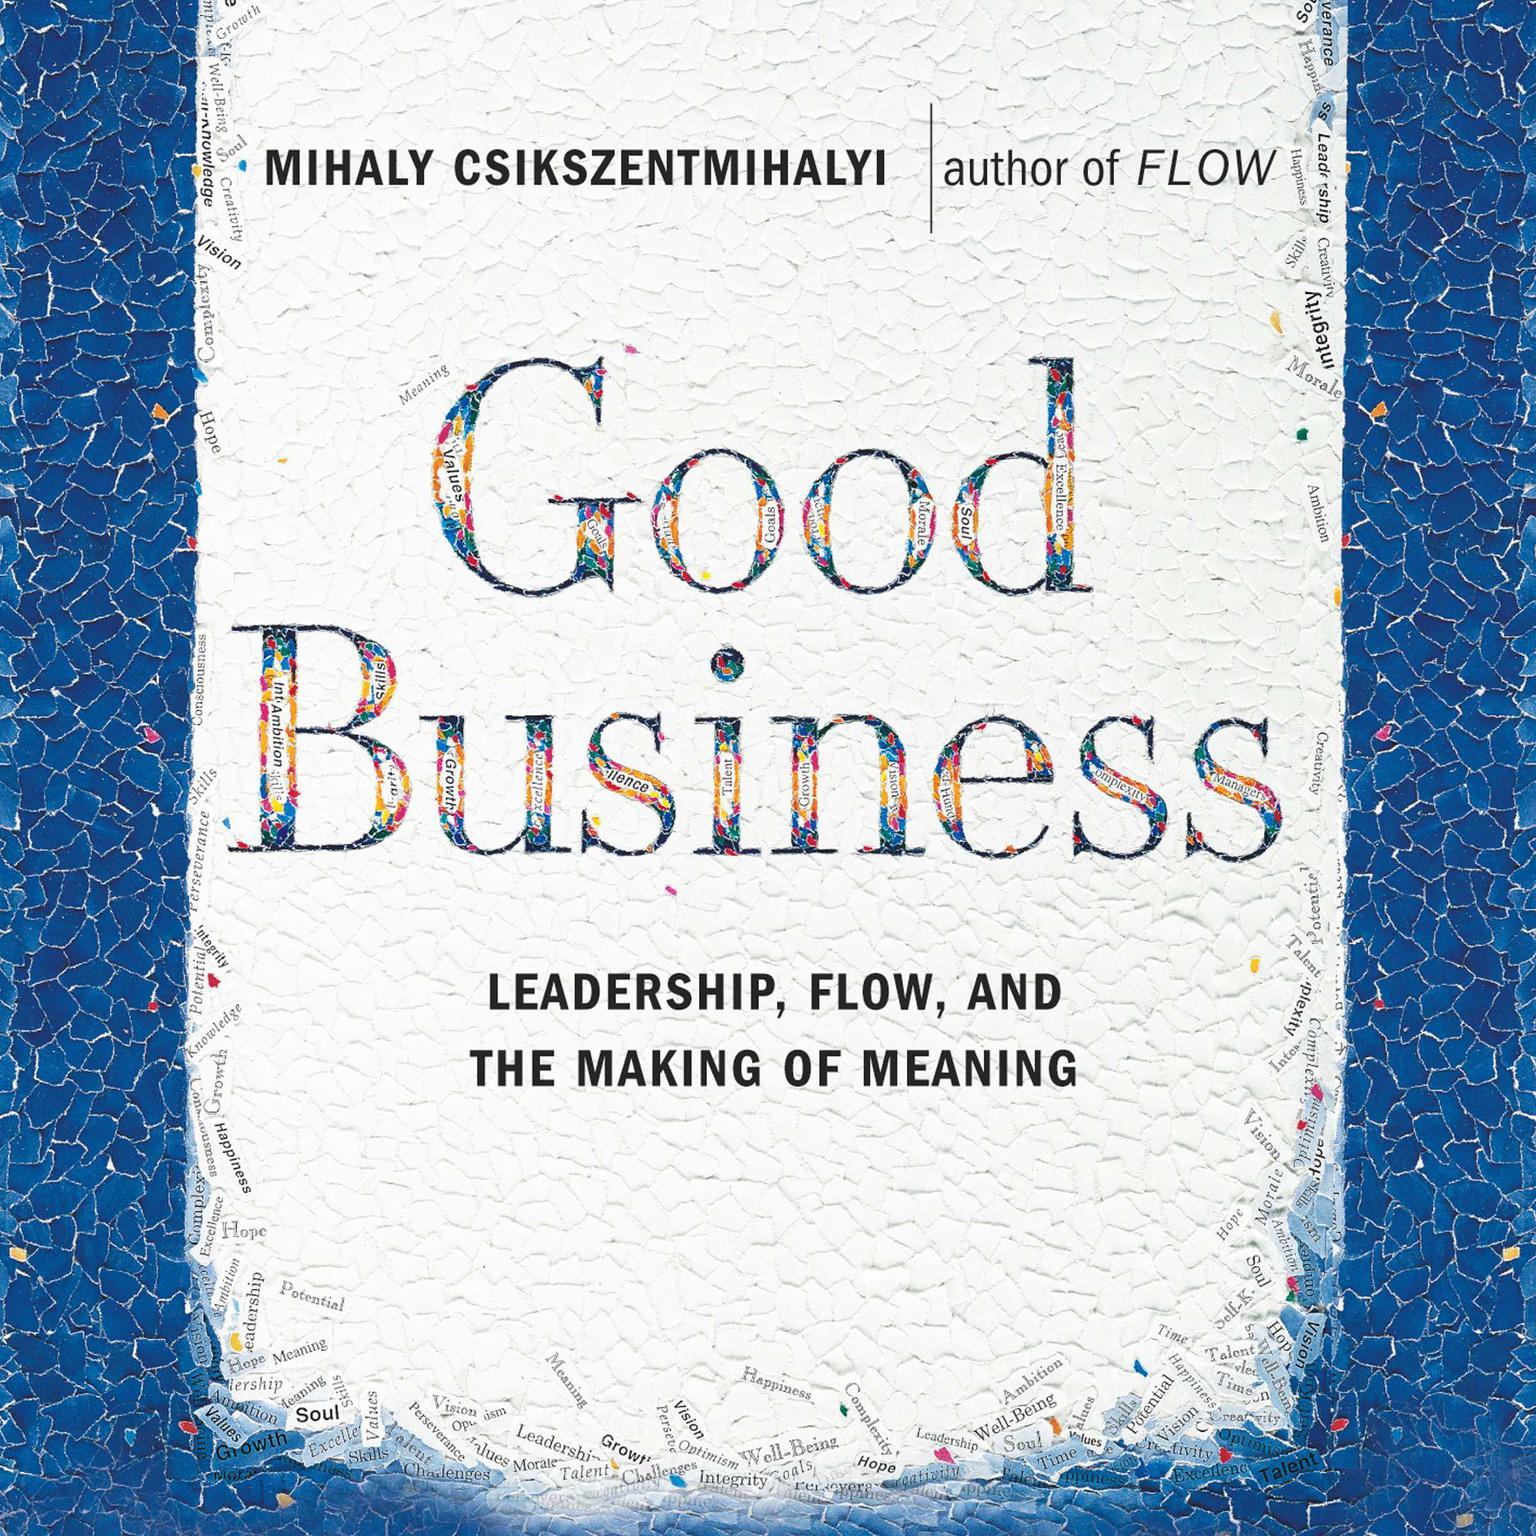 Good Business (Abridged): Leadership, Flow and the Making of Meaning Audiobook, by Mihaly Csikszentmihalyi